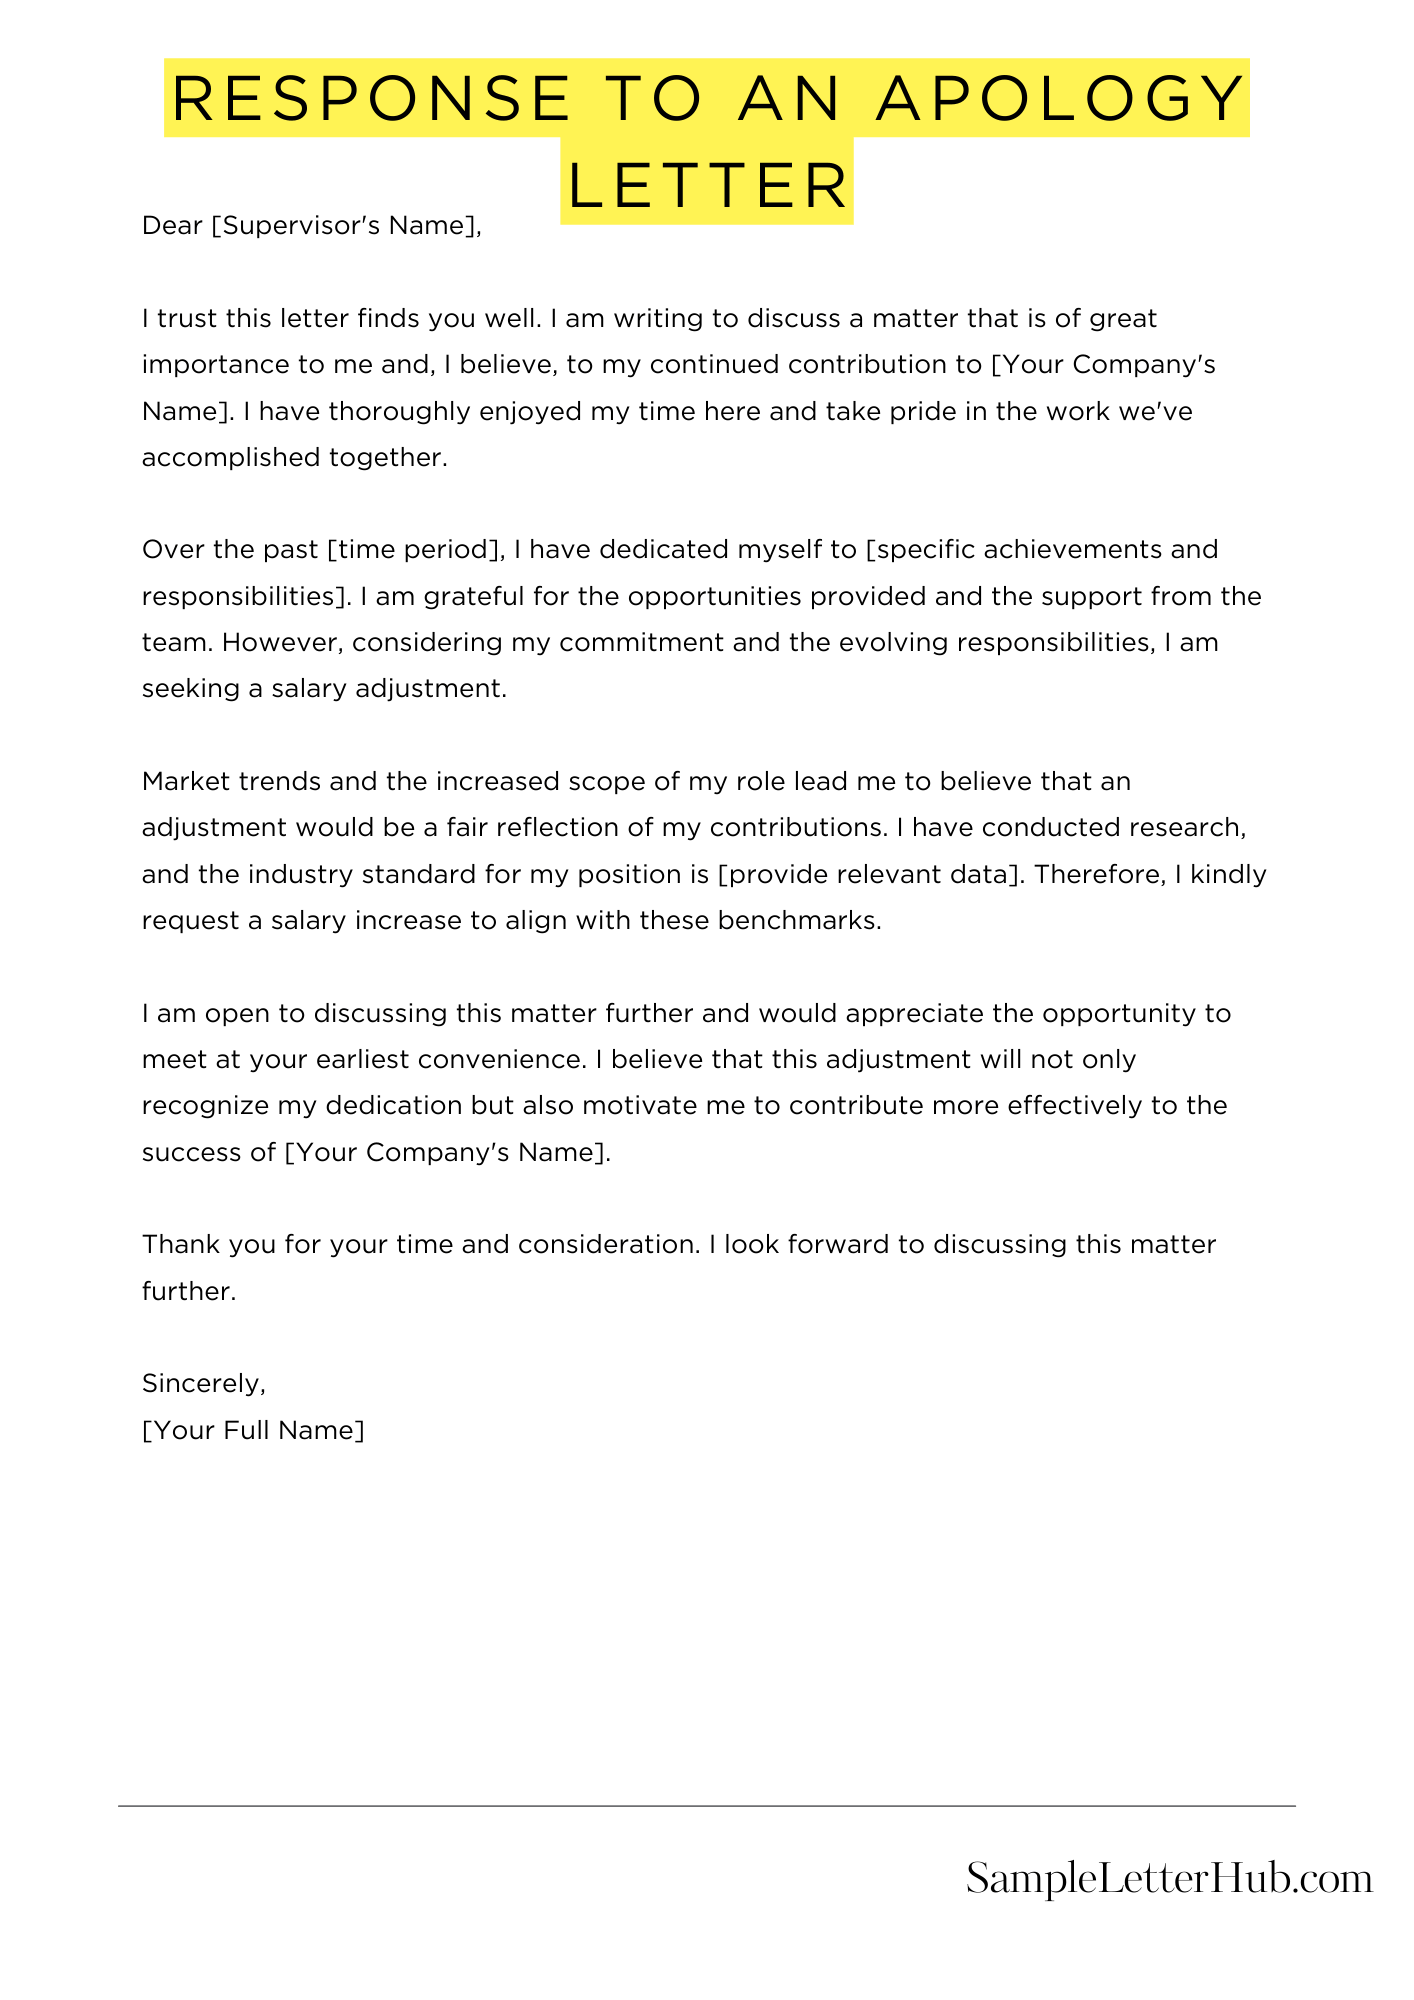 Response To An Apology Letter